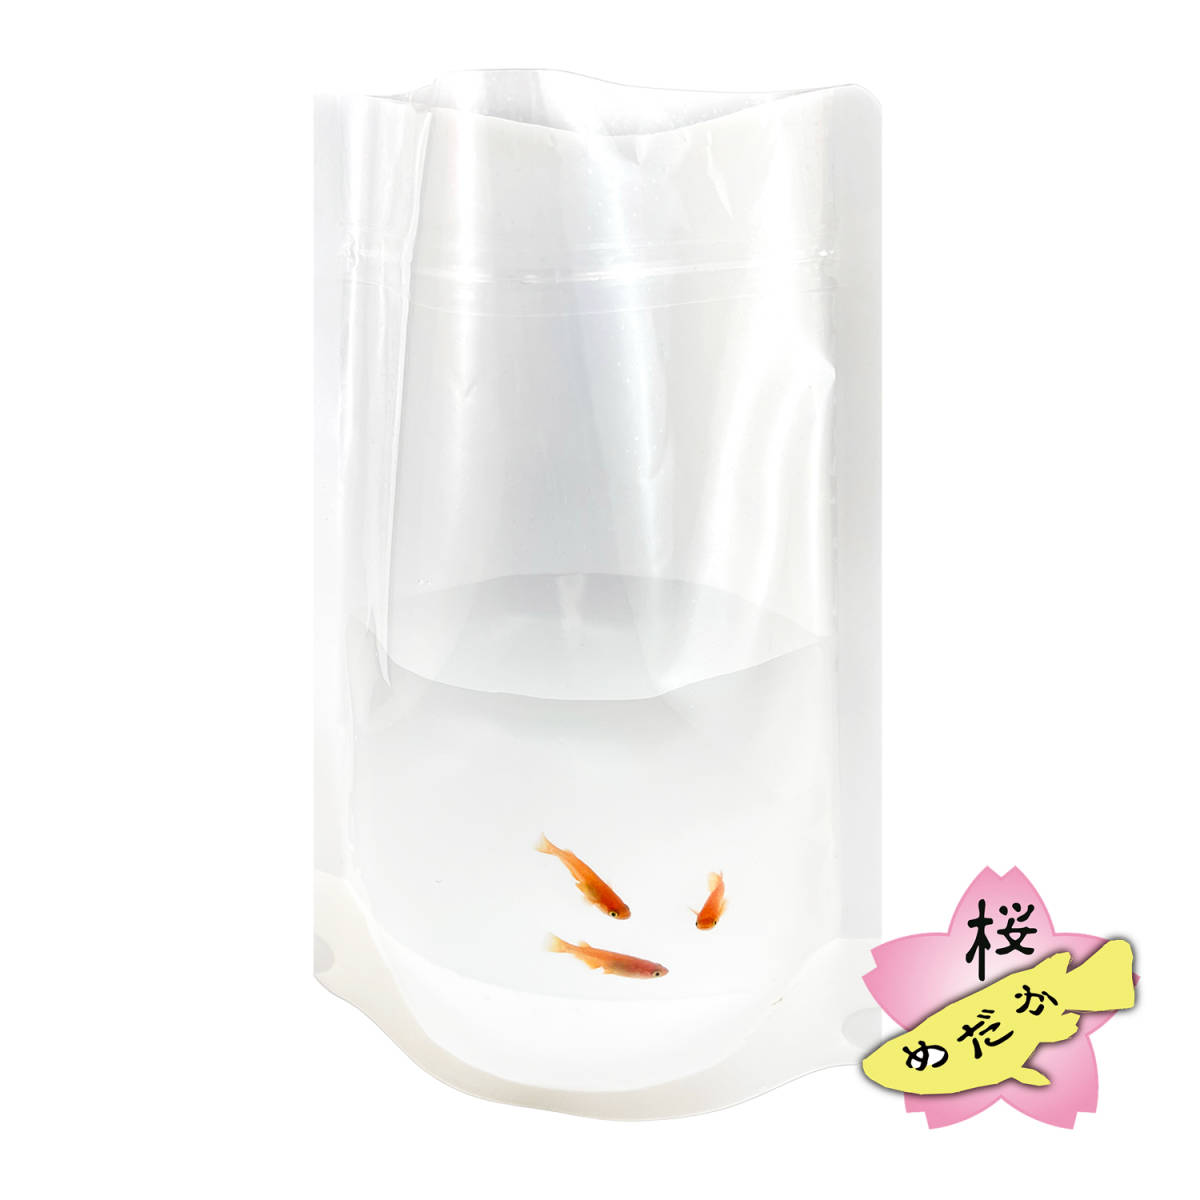 me Dakar for sales promotion display * white stand type pack container (30 sheets )